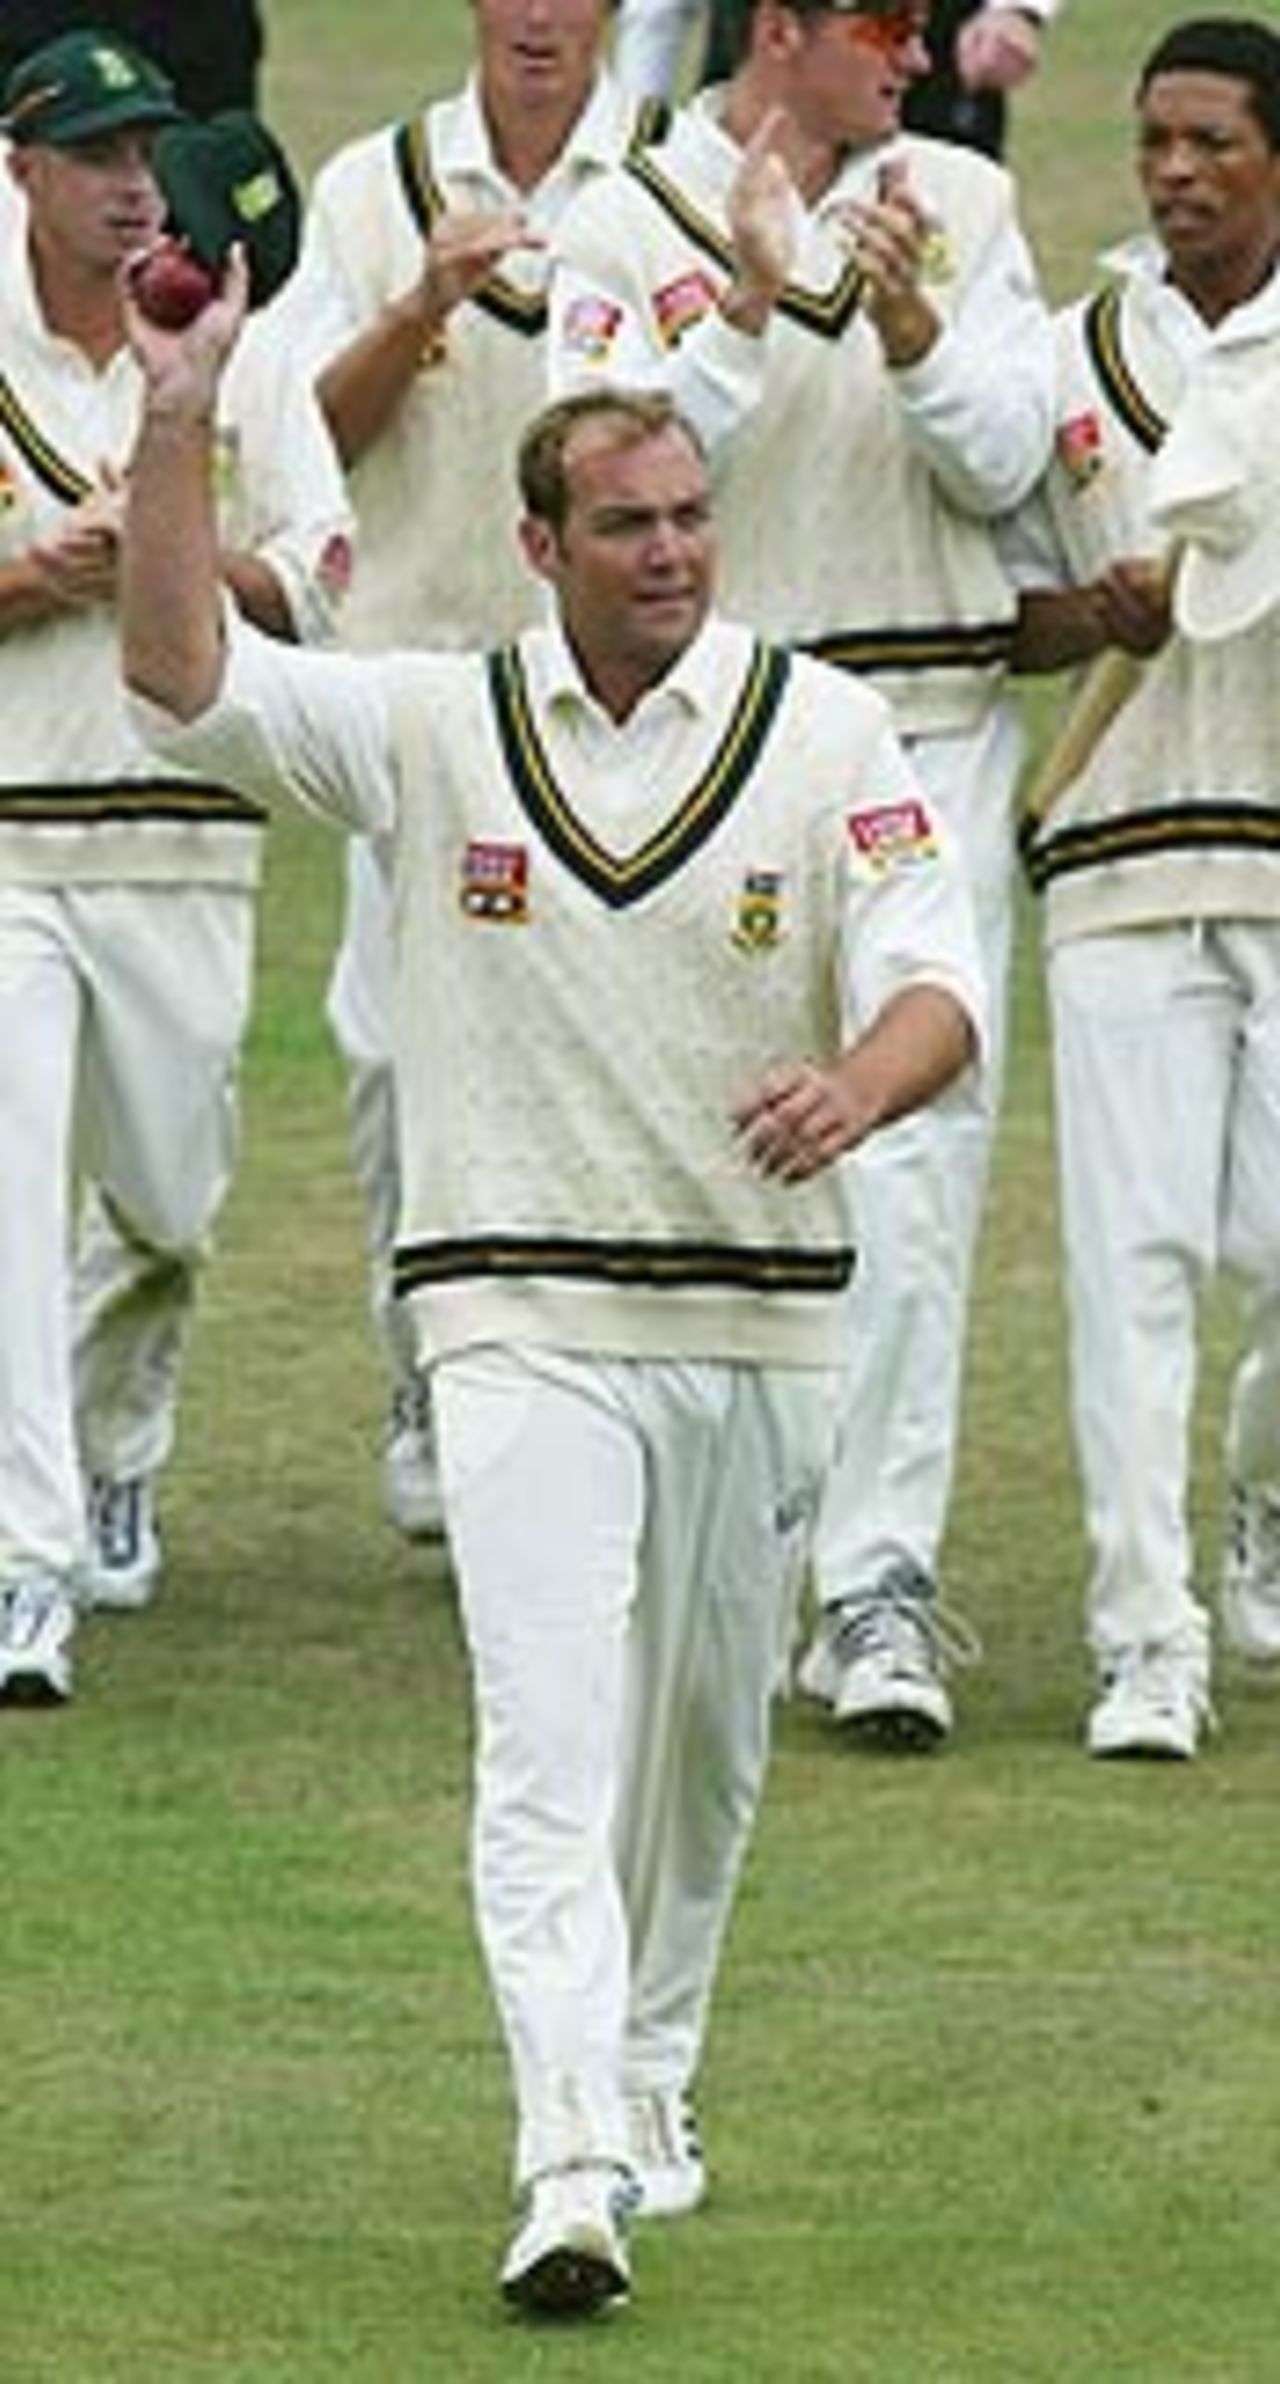 Jacques Kallis leads South Africa off, England v South Africa, 4th Test Headingley, August 25 2003